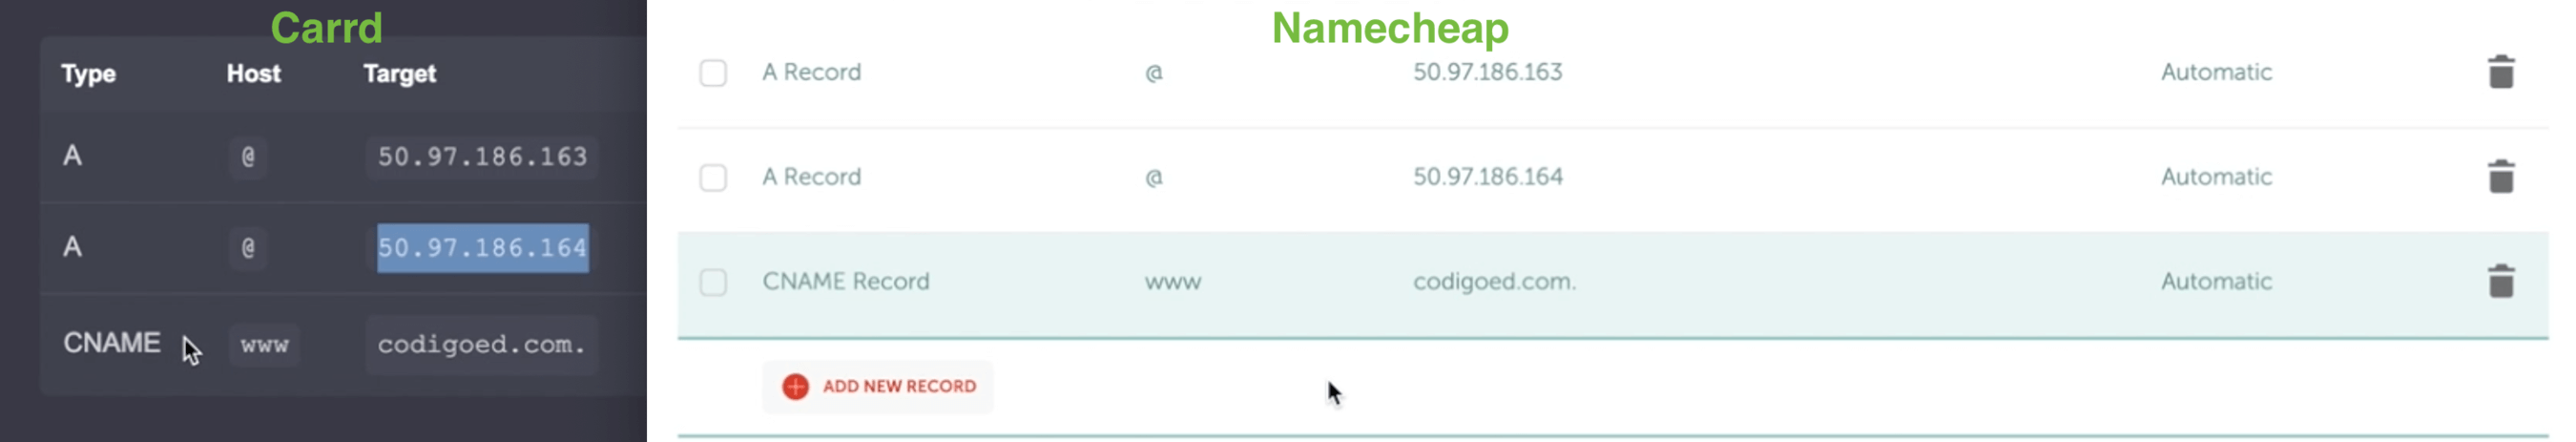 Screenshot showing how to insert the carrd values into namecheap for a custom domain